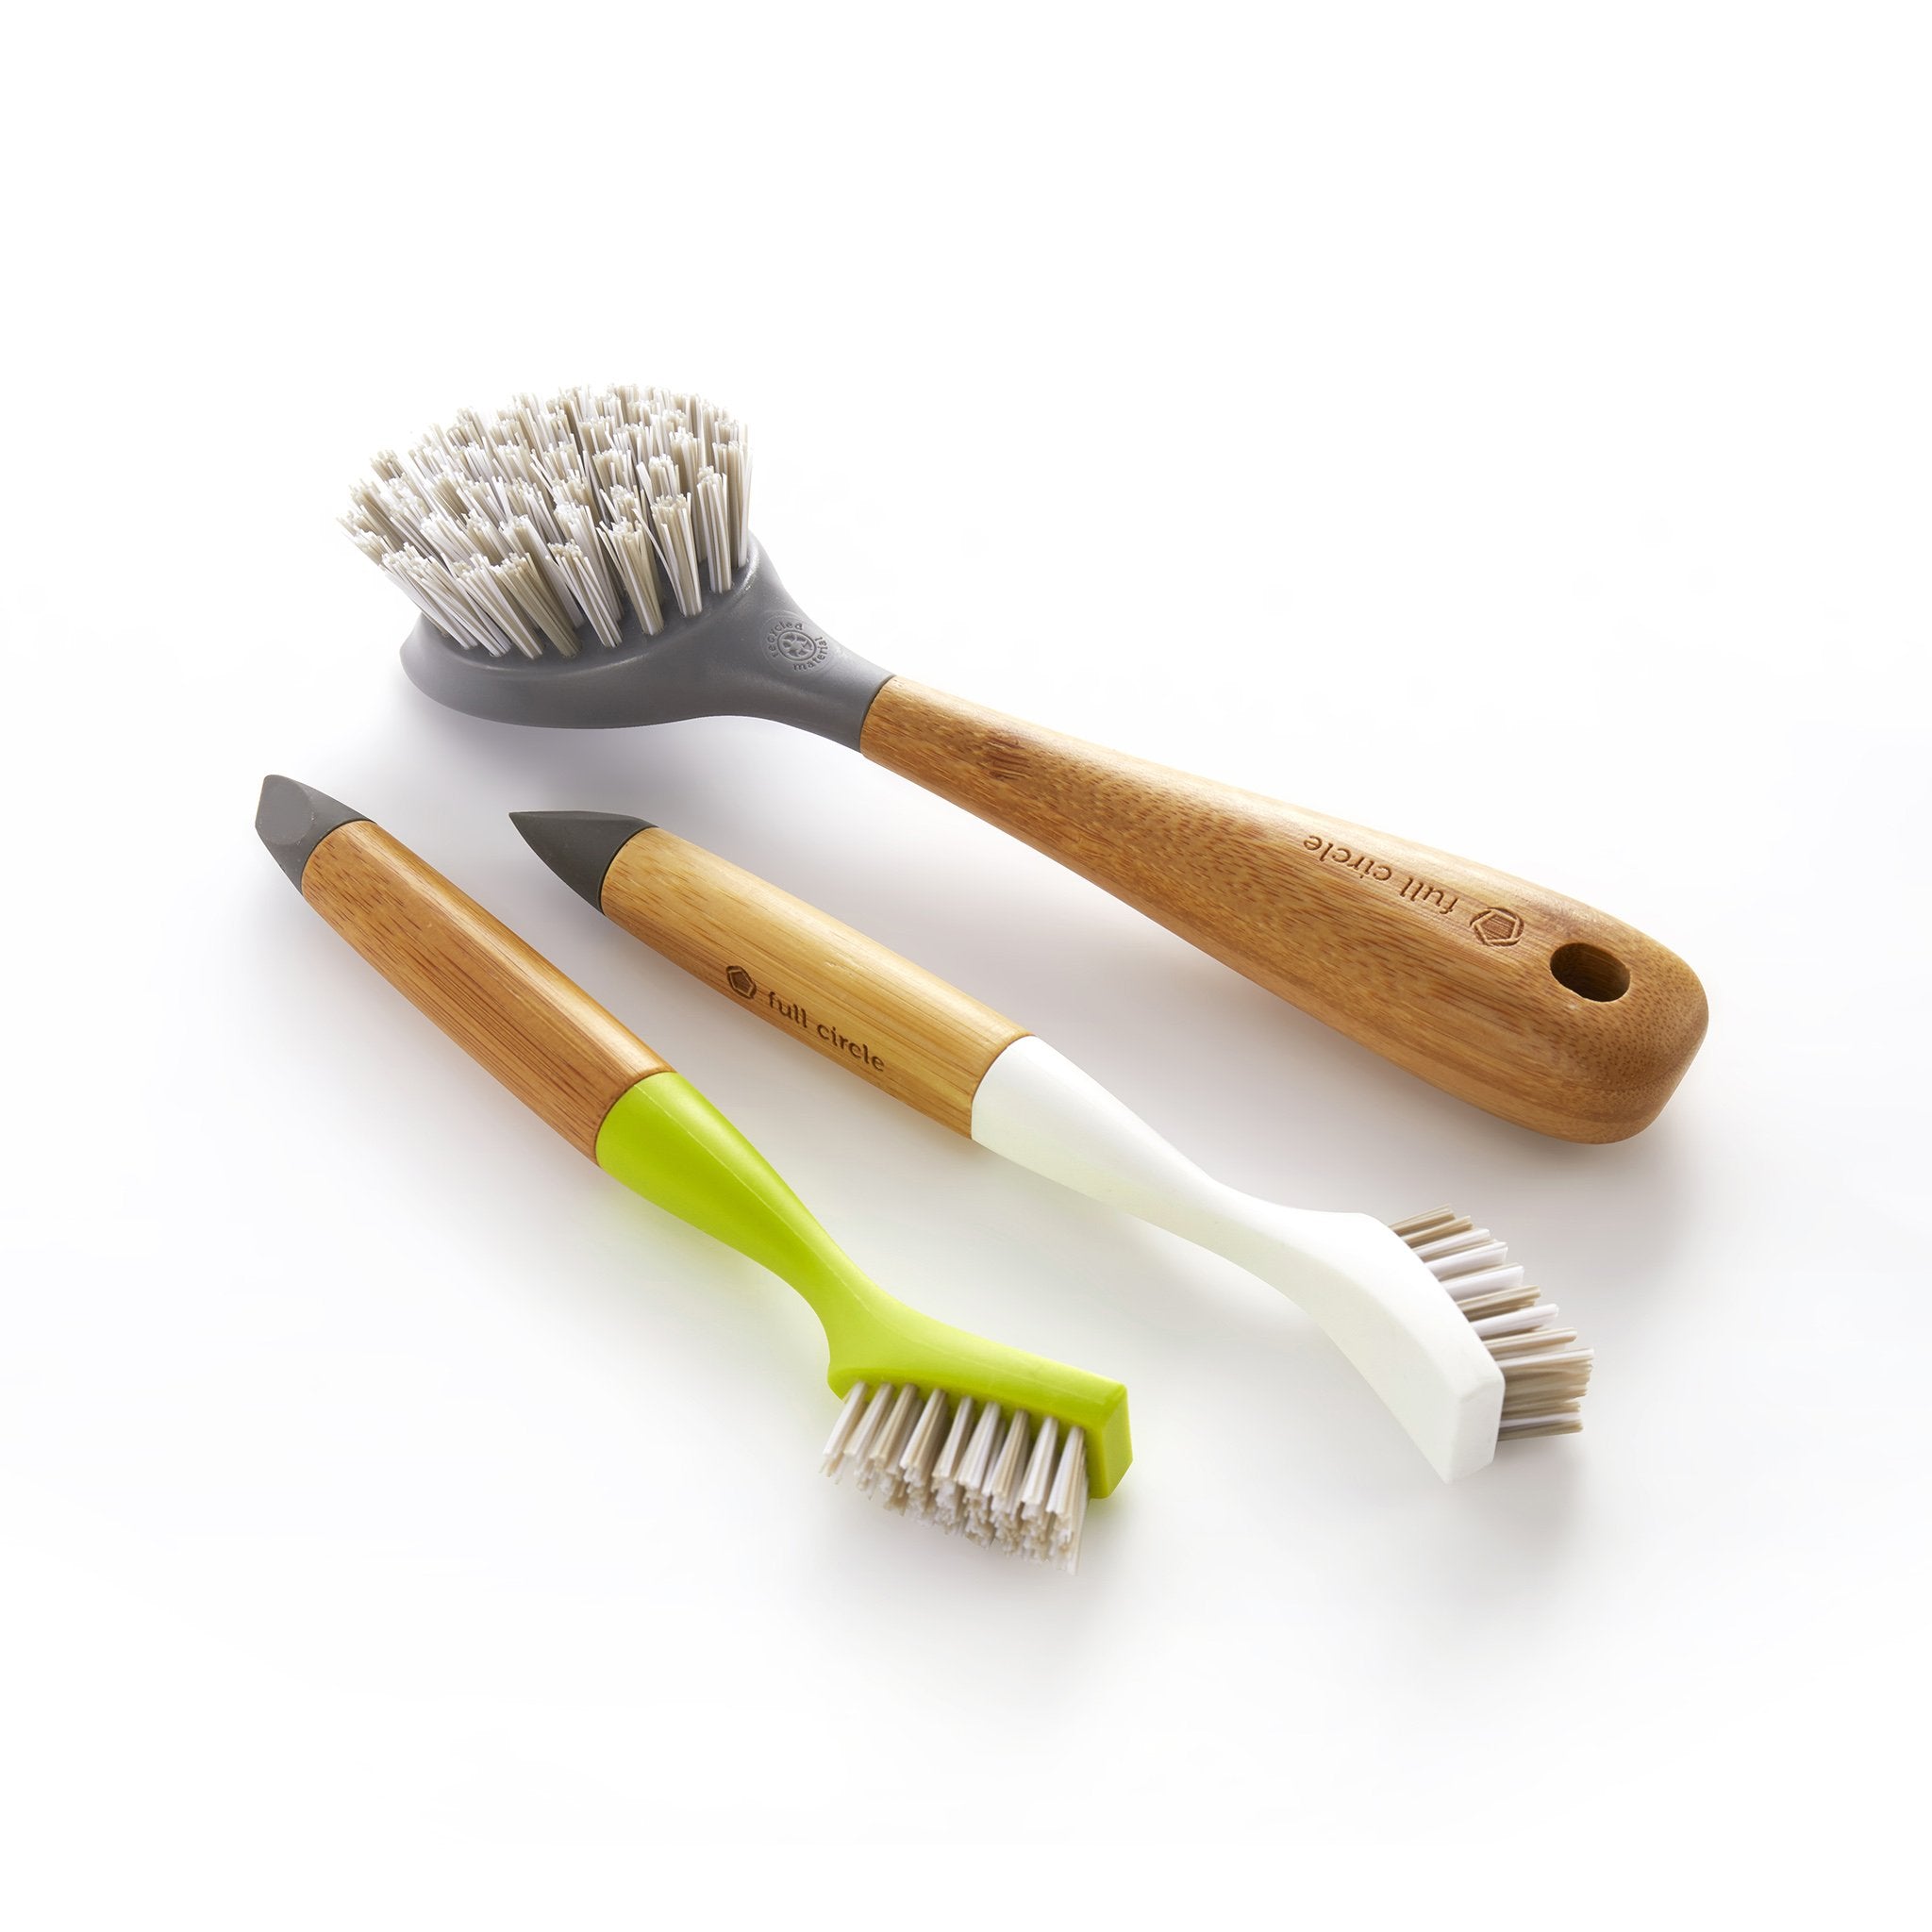 Micro Cleaning Brushes - StewMac